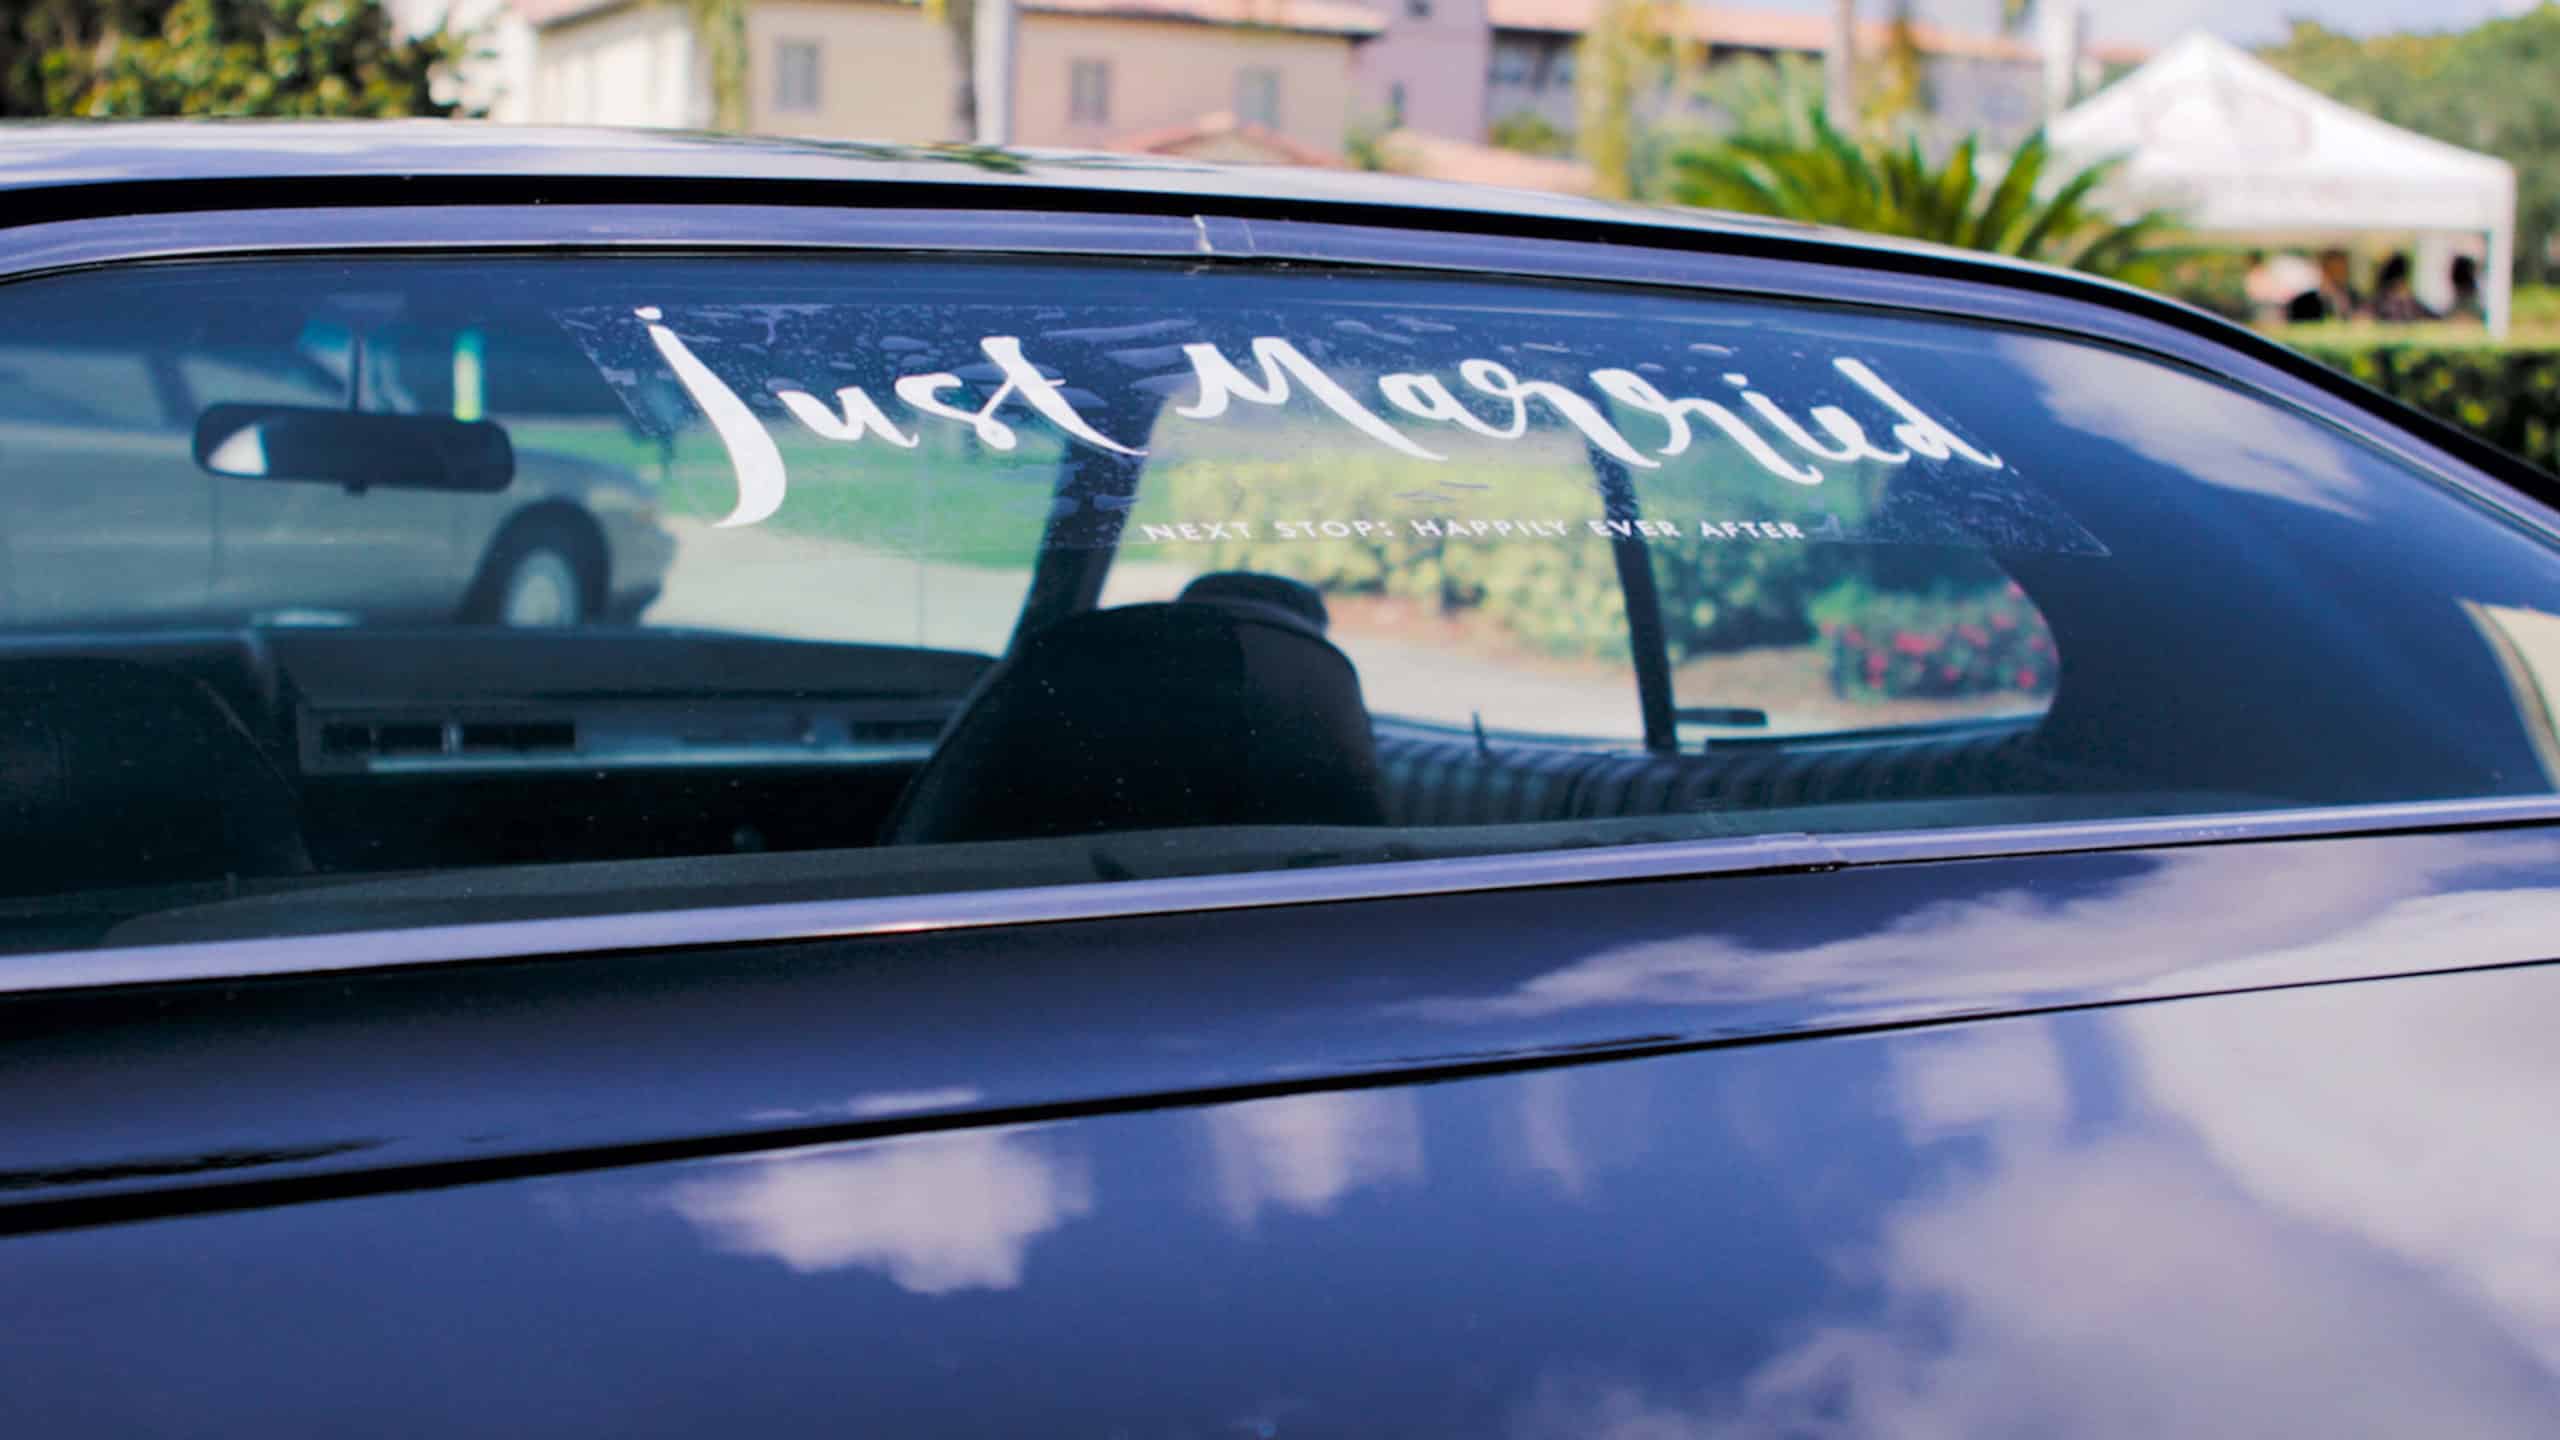 The back window of a car reads Just Married